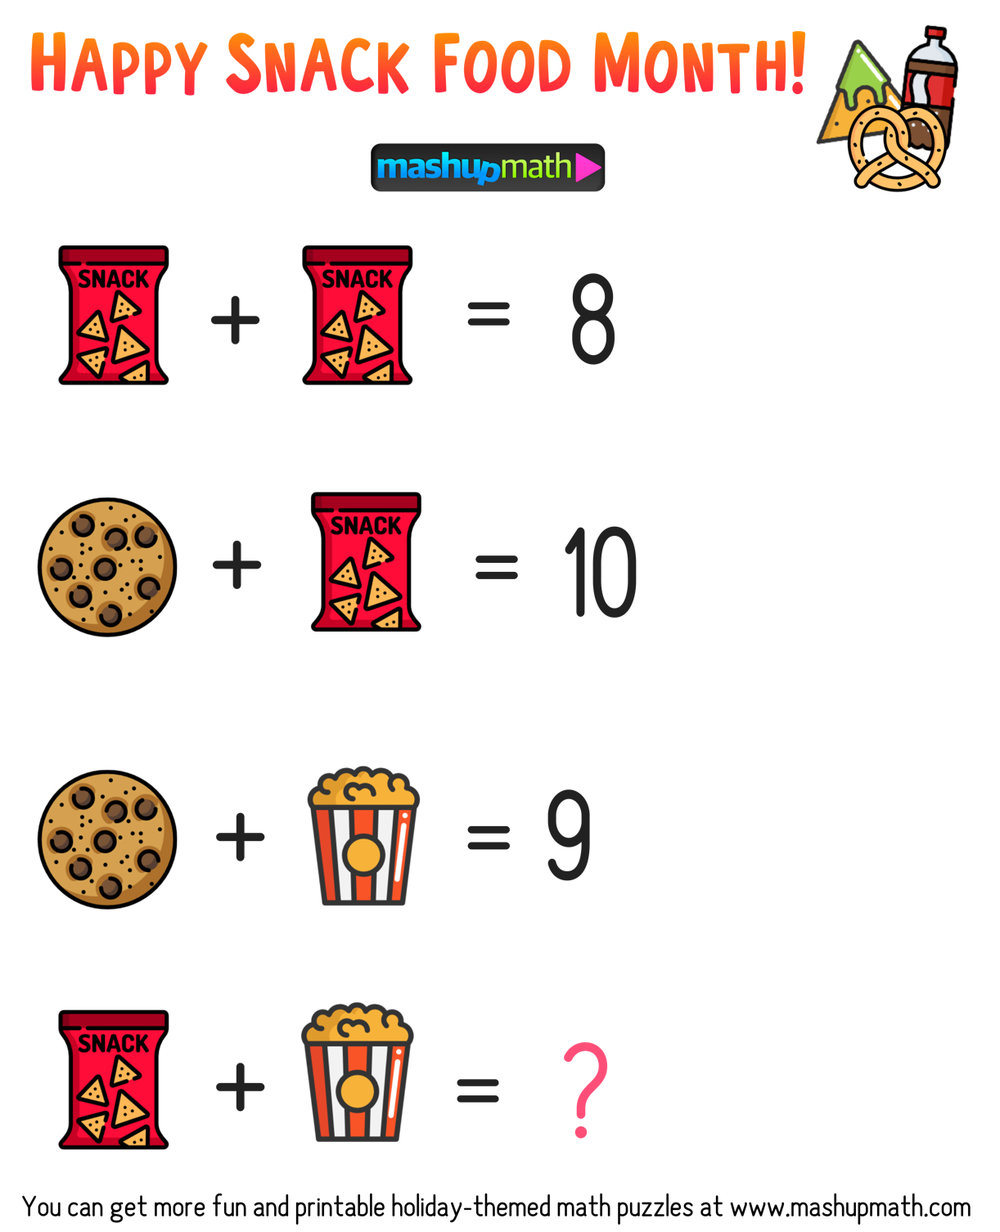 Free Math Brain Teaser Puzzles For Kids In Grades 1-6 To Celebrate Snack Food Month! — Mashup Math